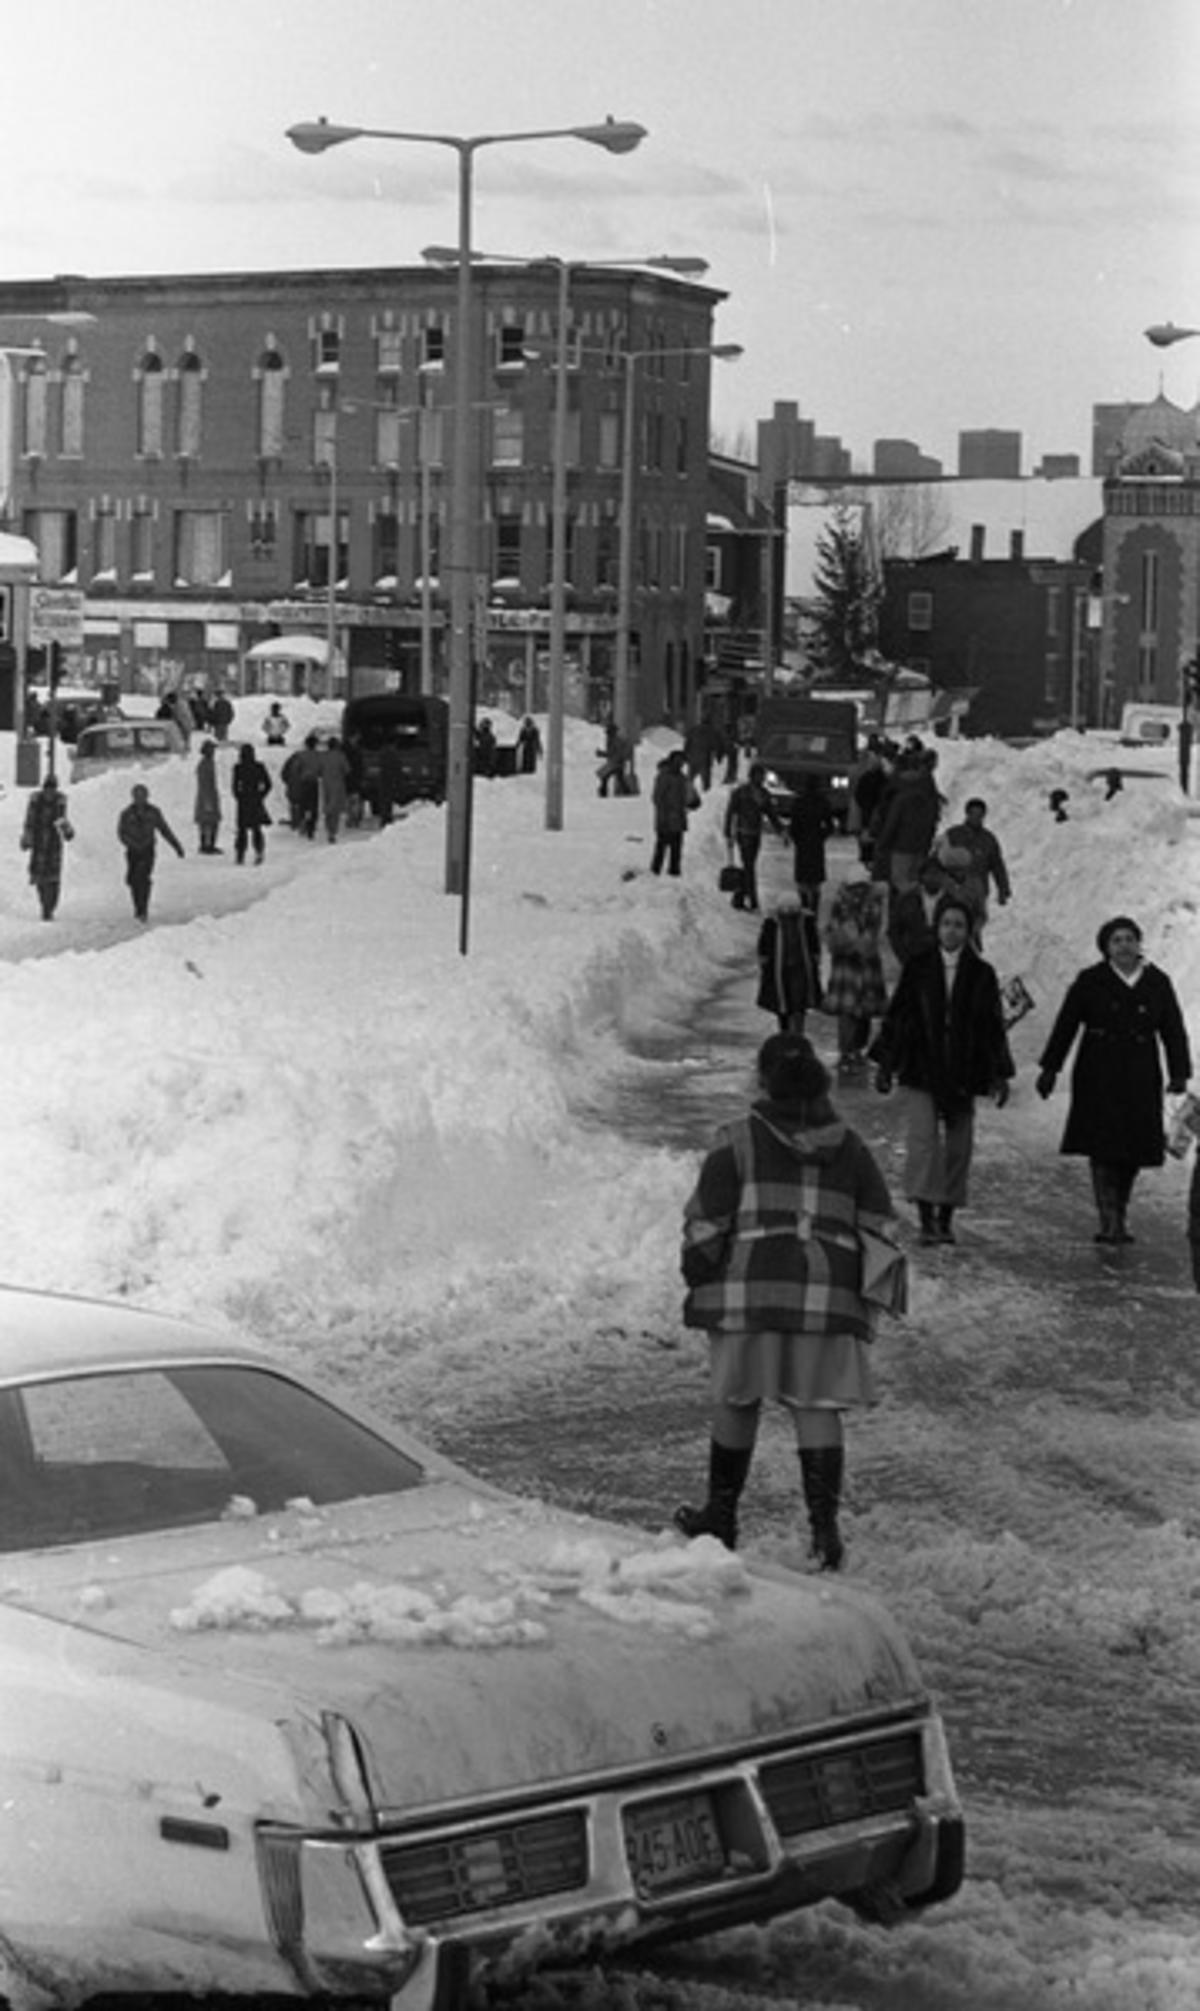 Pedestrians and vehicles on snowy Blue Hill Avenue and Warren Street